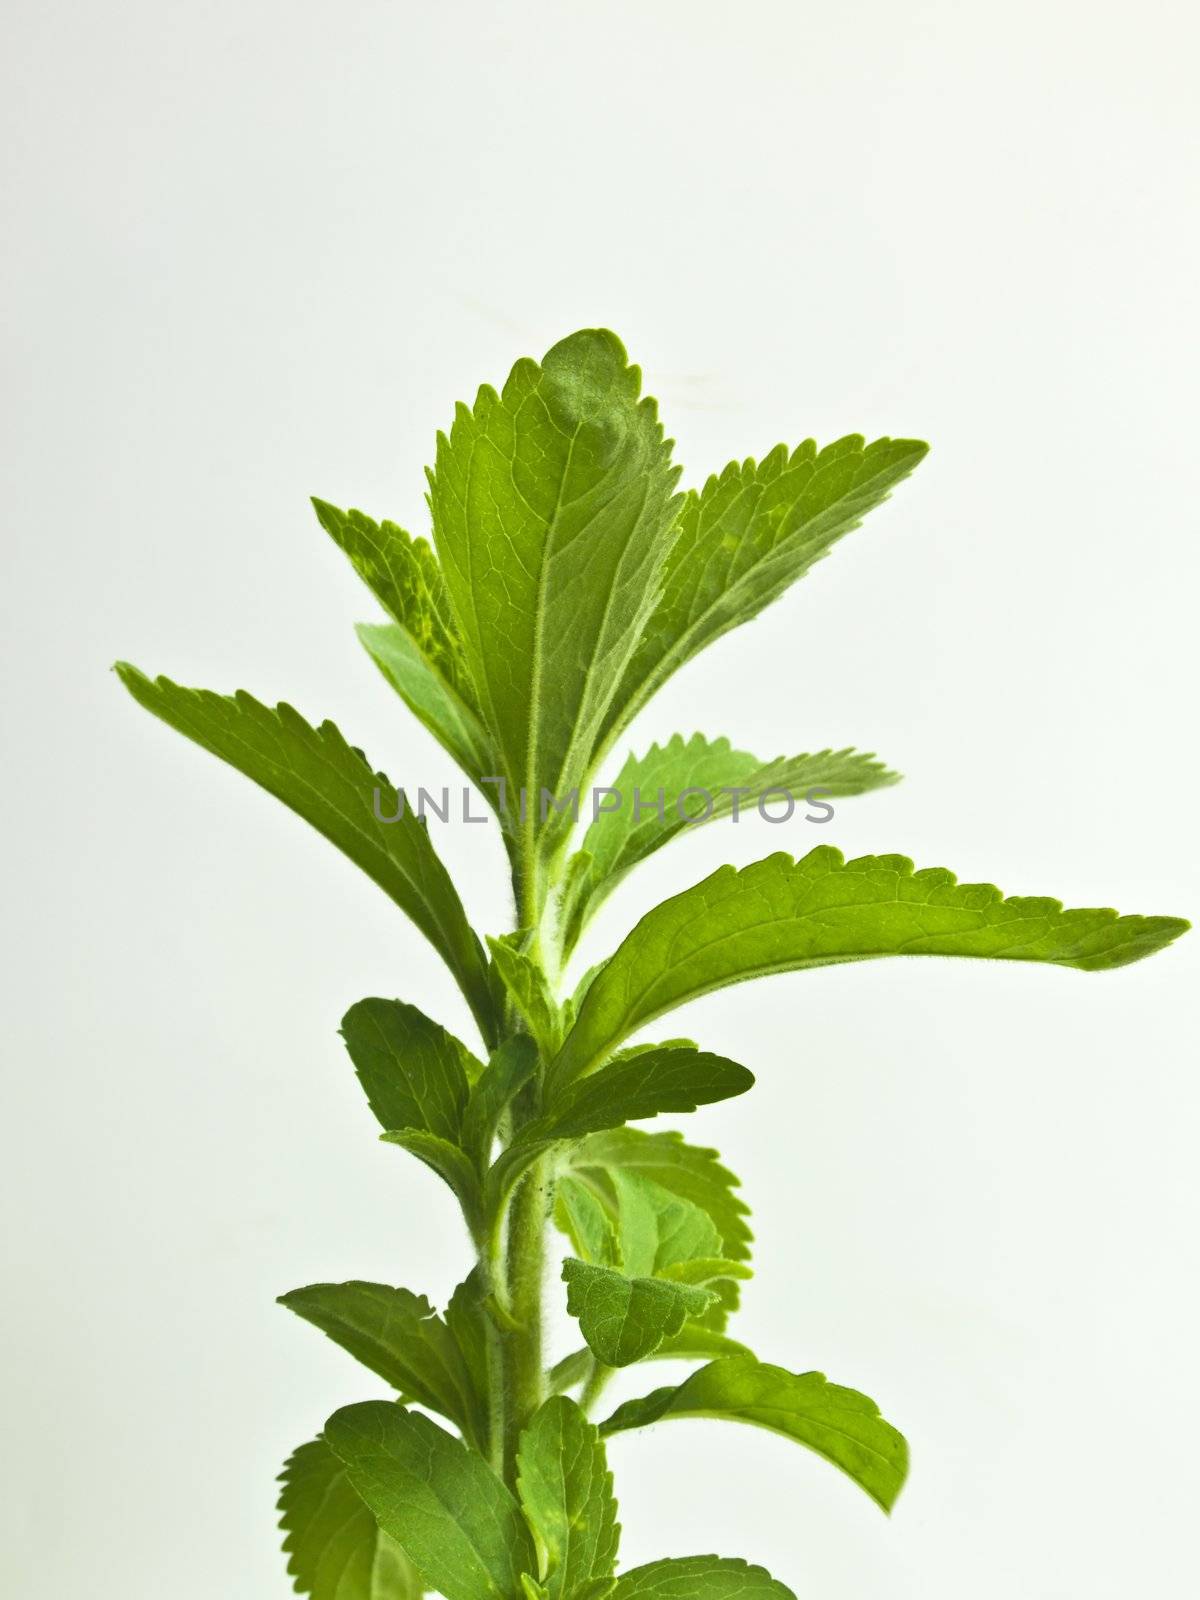 the support of the Stevia rebaudiana by Jochen